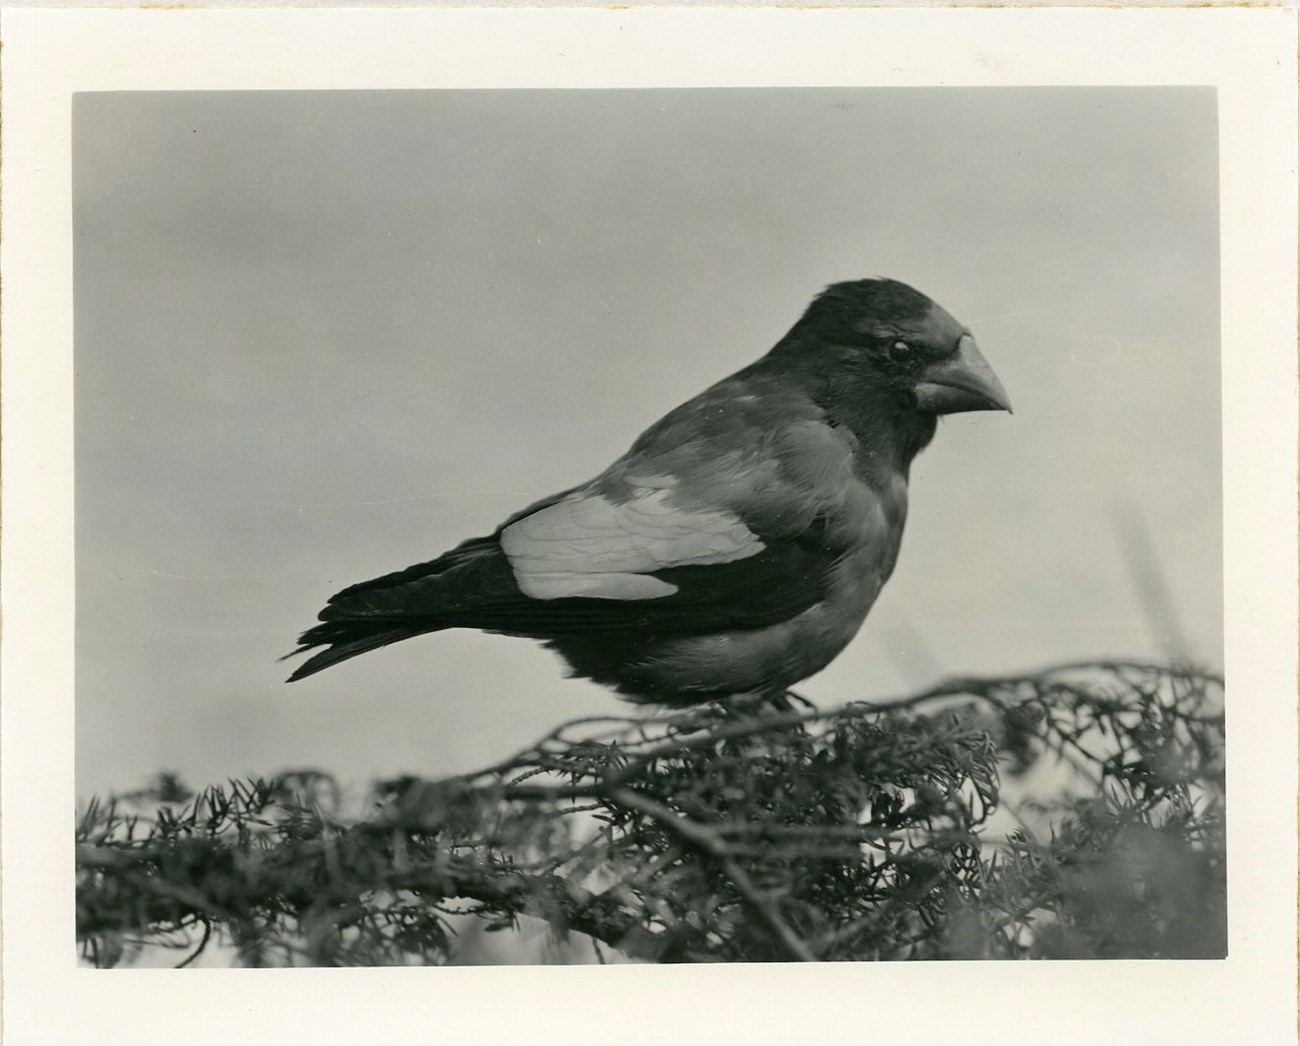 a black and white photo of a bird with prominent conical bill